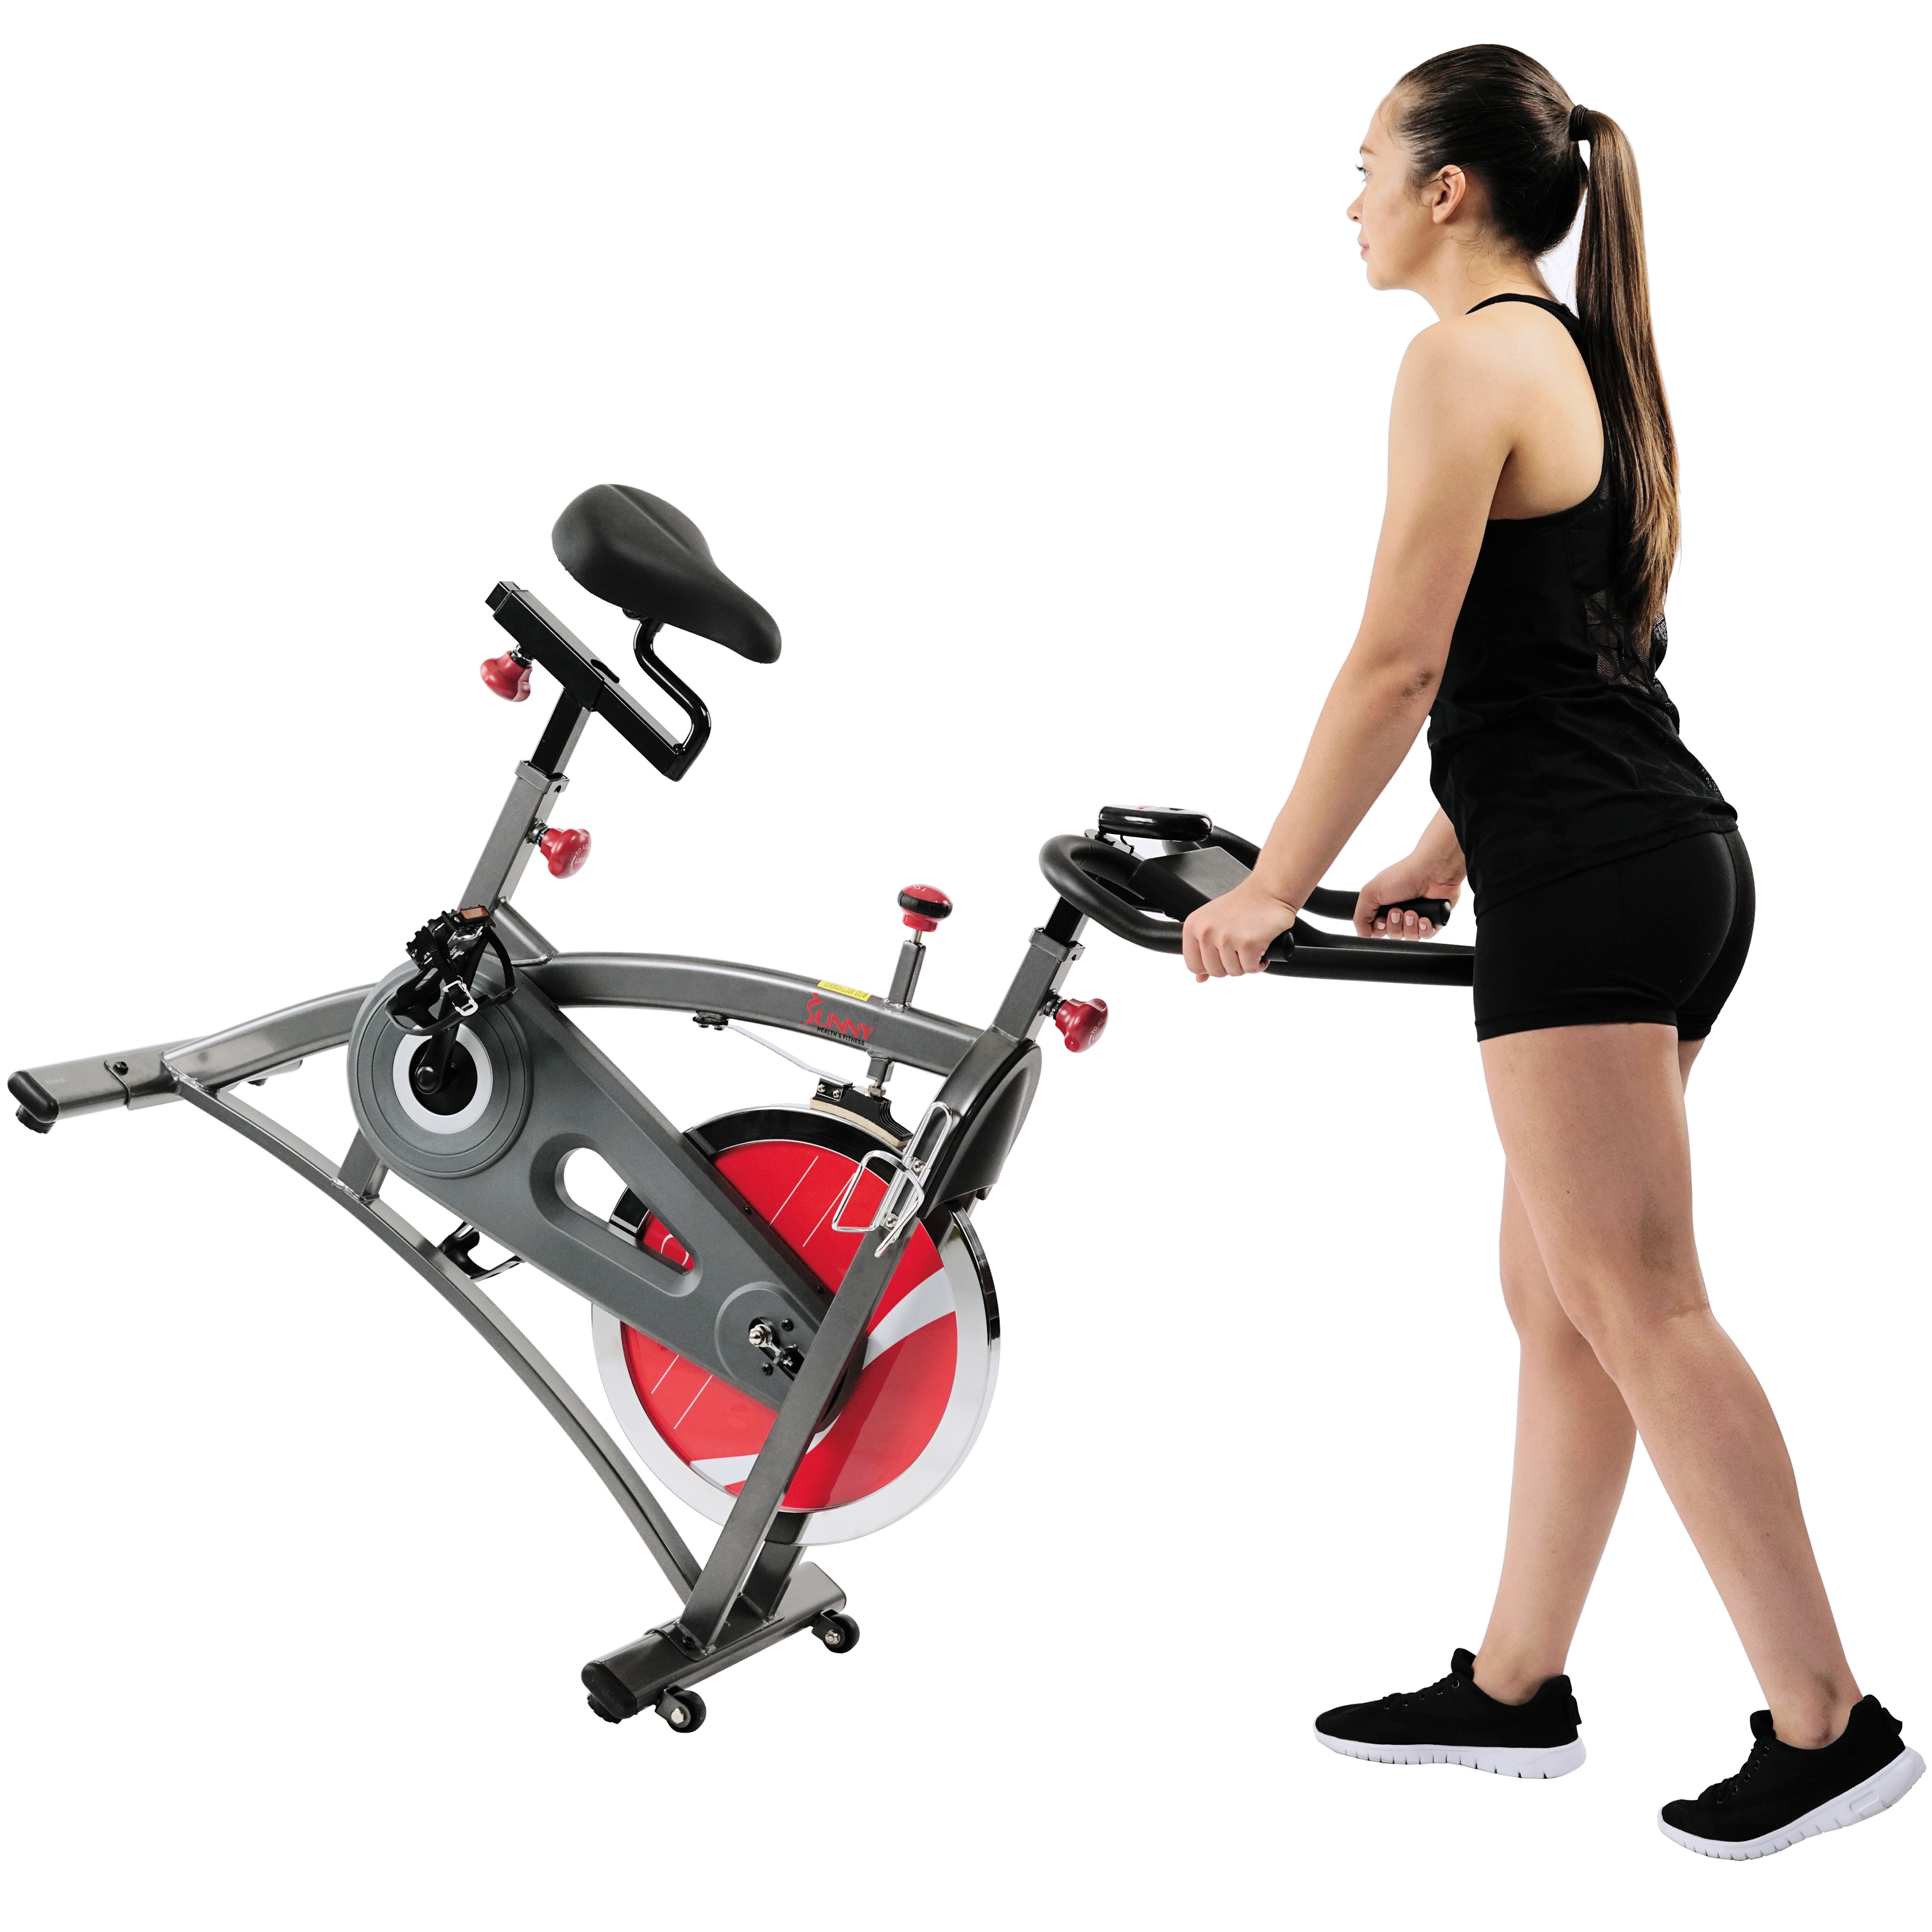 Sunny Health & Fitness SF-B1423 Belt Drive Indoor Cycling Bike Exercise Bike w/ LCD Monitor - image 5 of 7